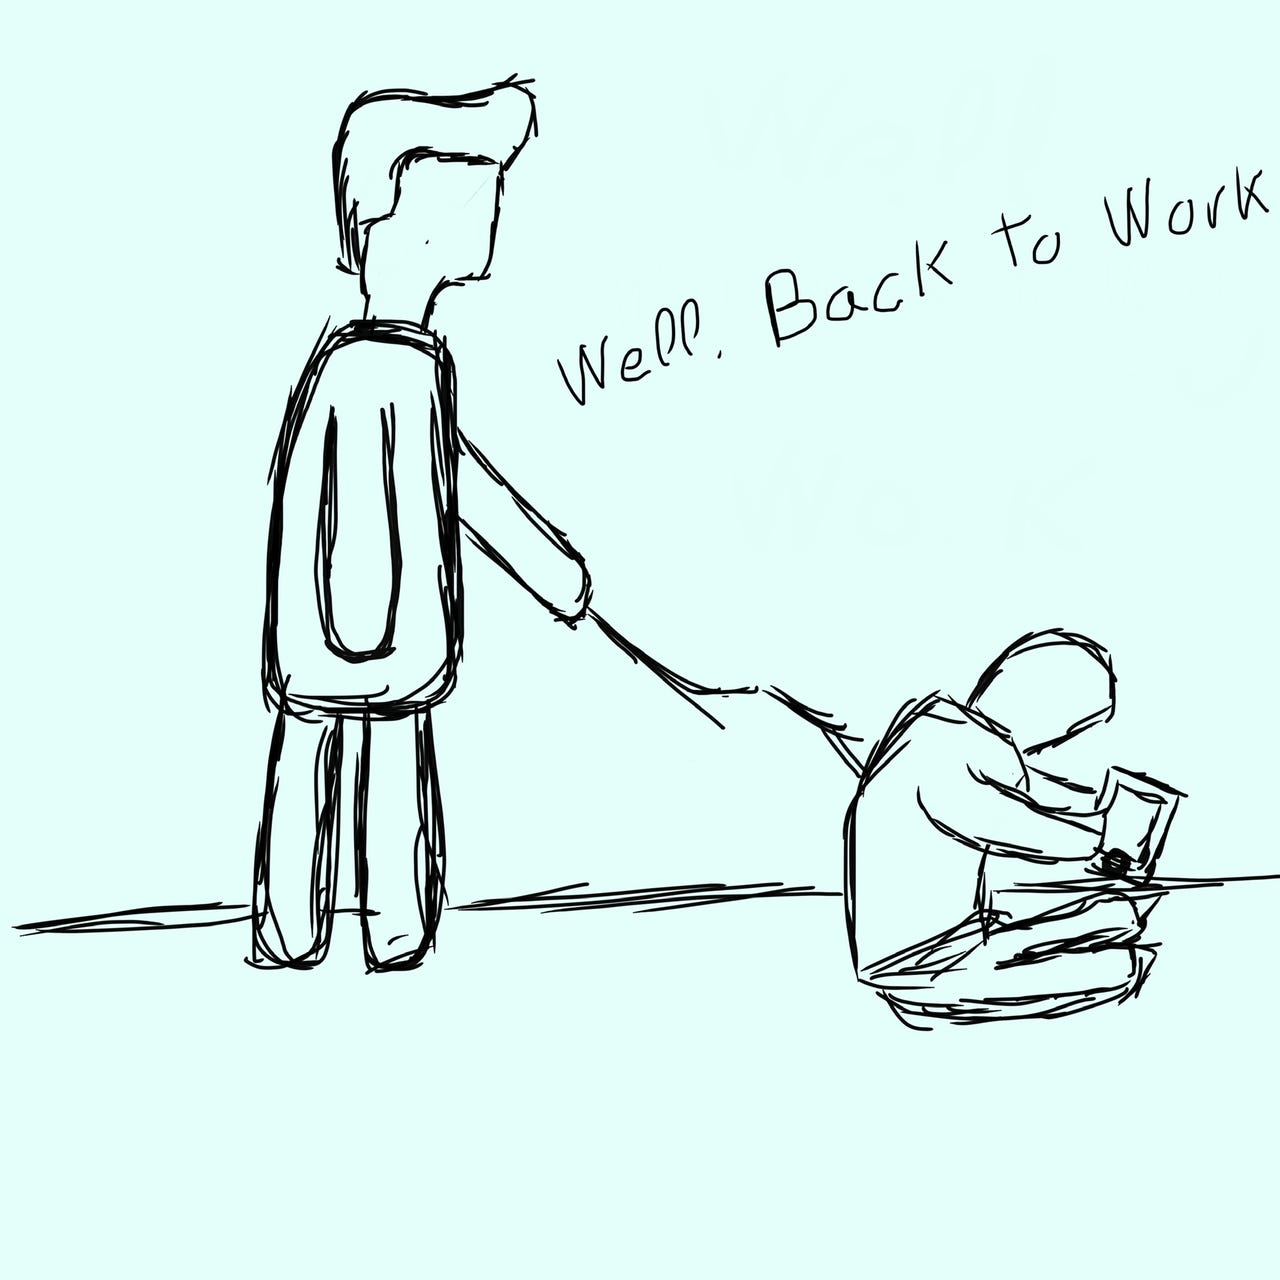 Artwork for Well, back to Work